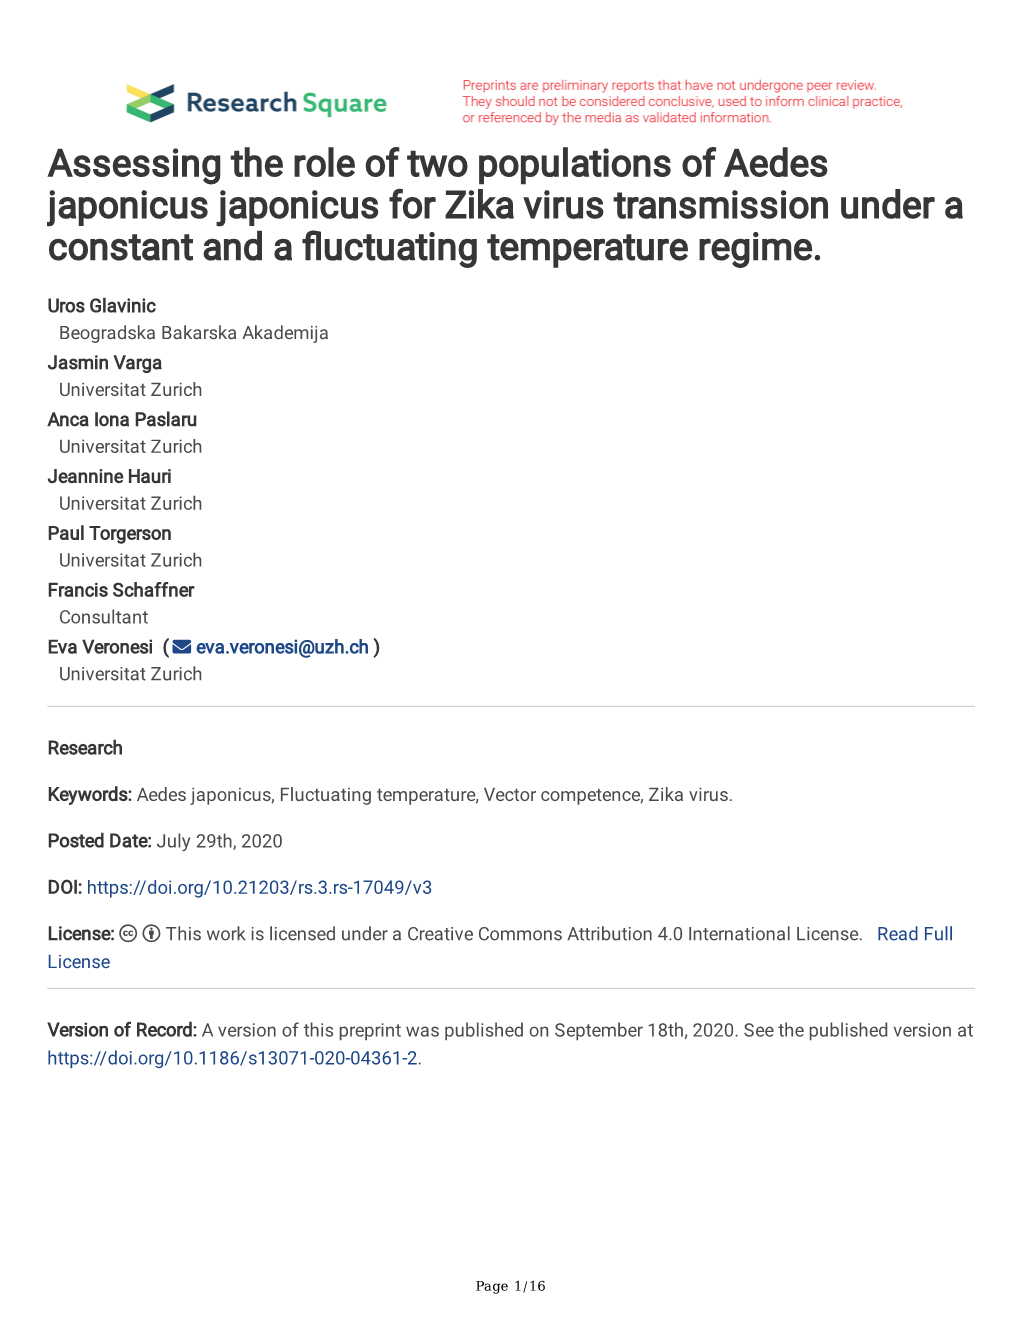 Assessing the Role of Two Populations of Aedes Japonicus Japonicus for Zika Virus Transmission Under a Constant and a Fuctuating Temperature Regime